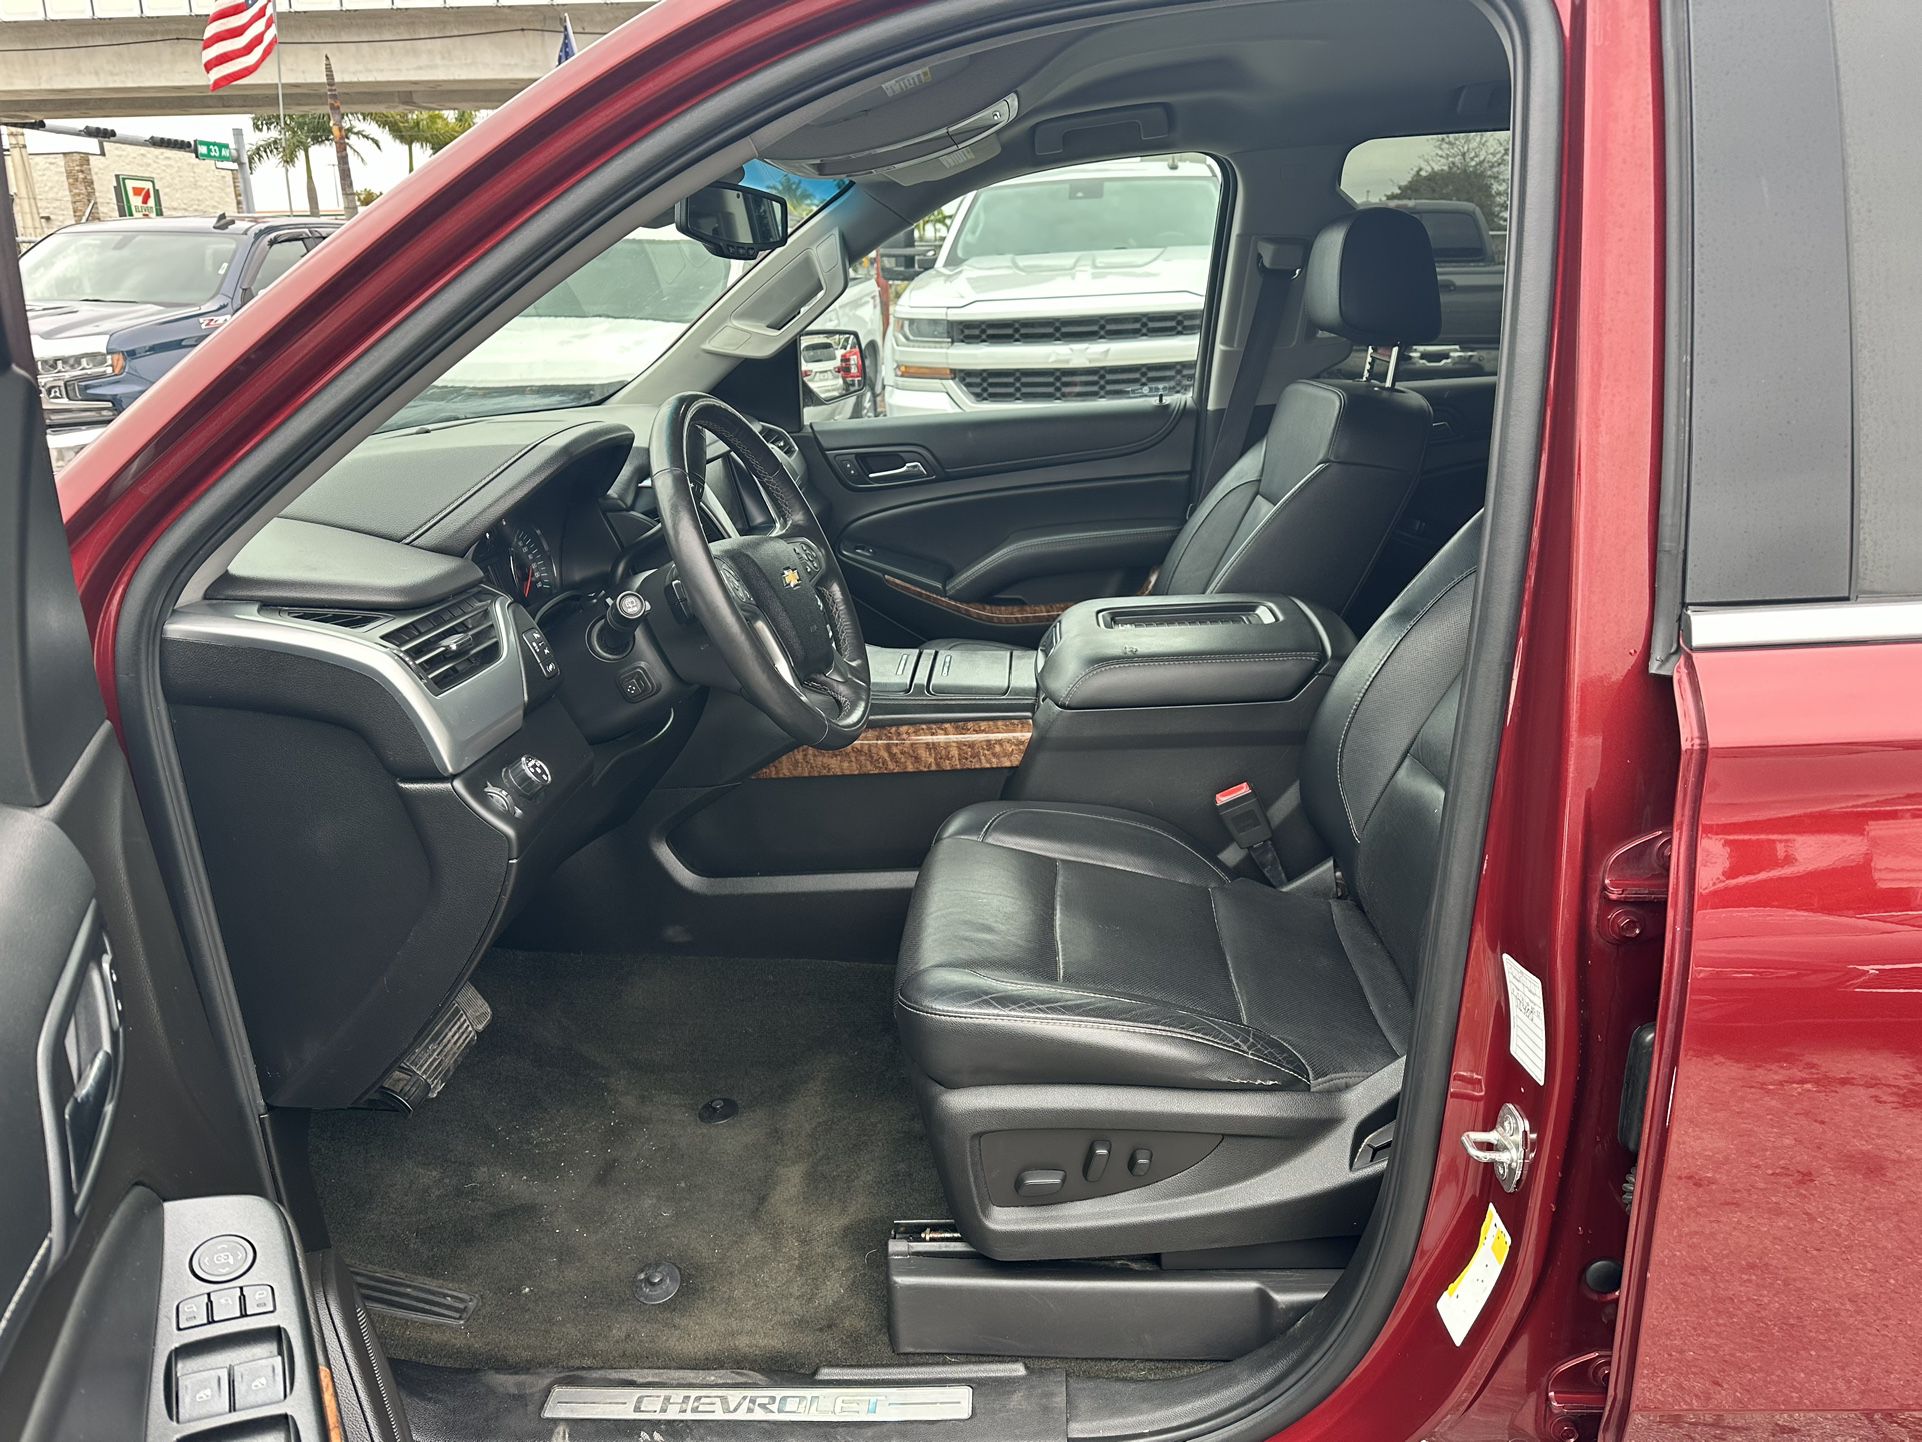 used 2017 Chevy Tahoe - interior view 1